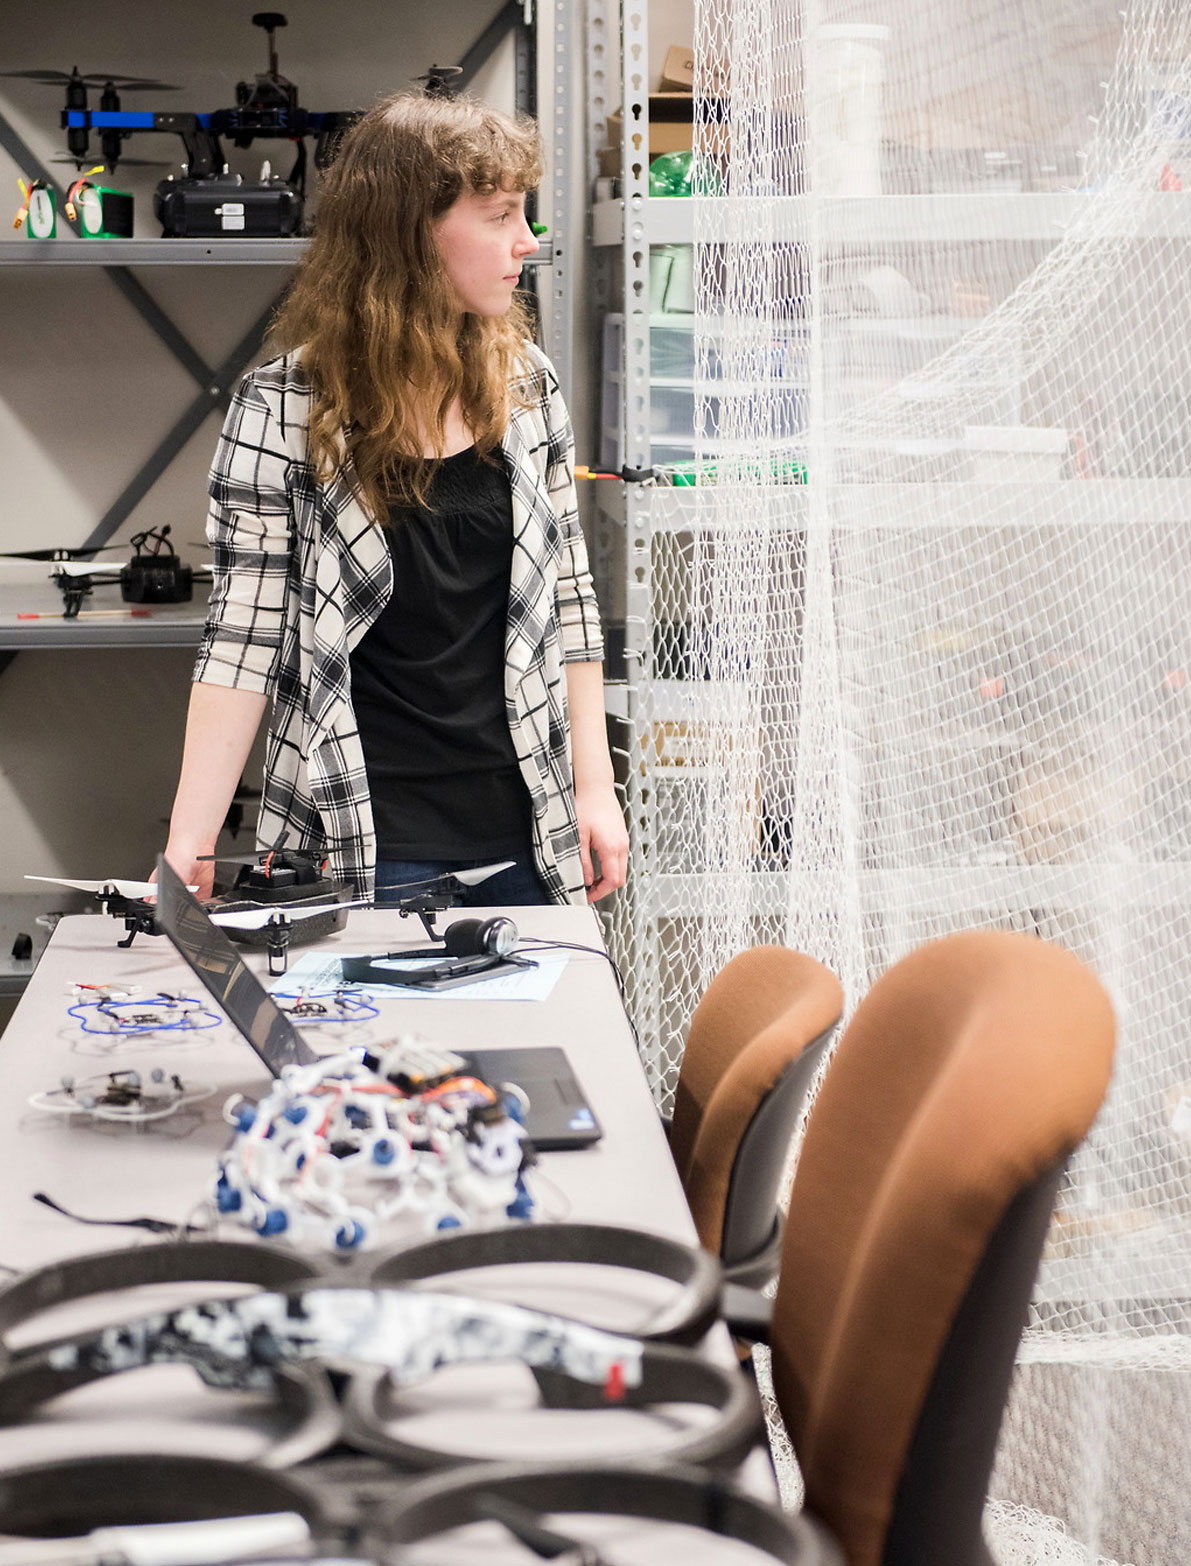 A UT student at a workbench with drone equipment